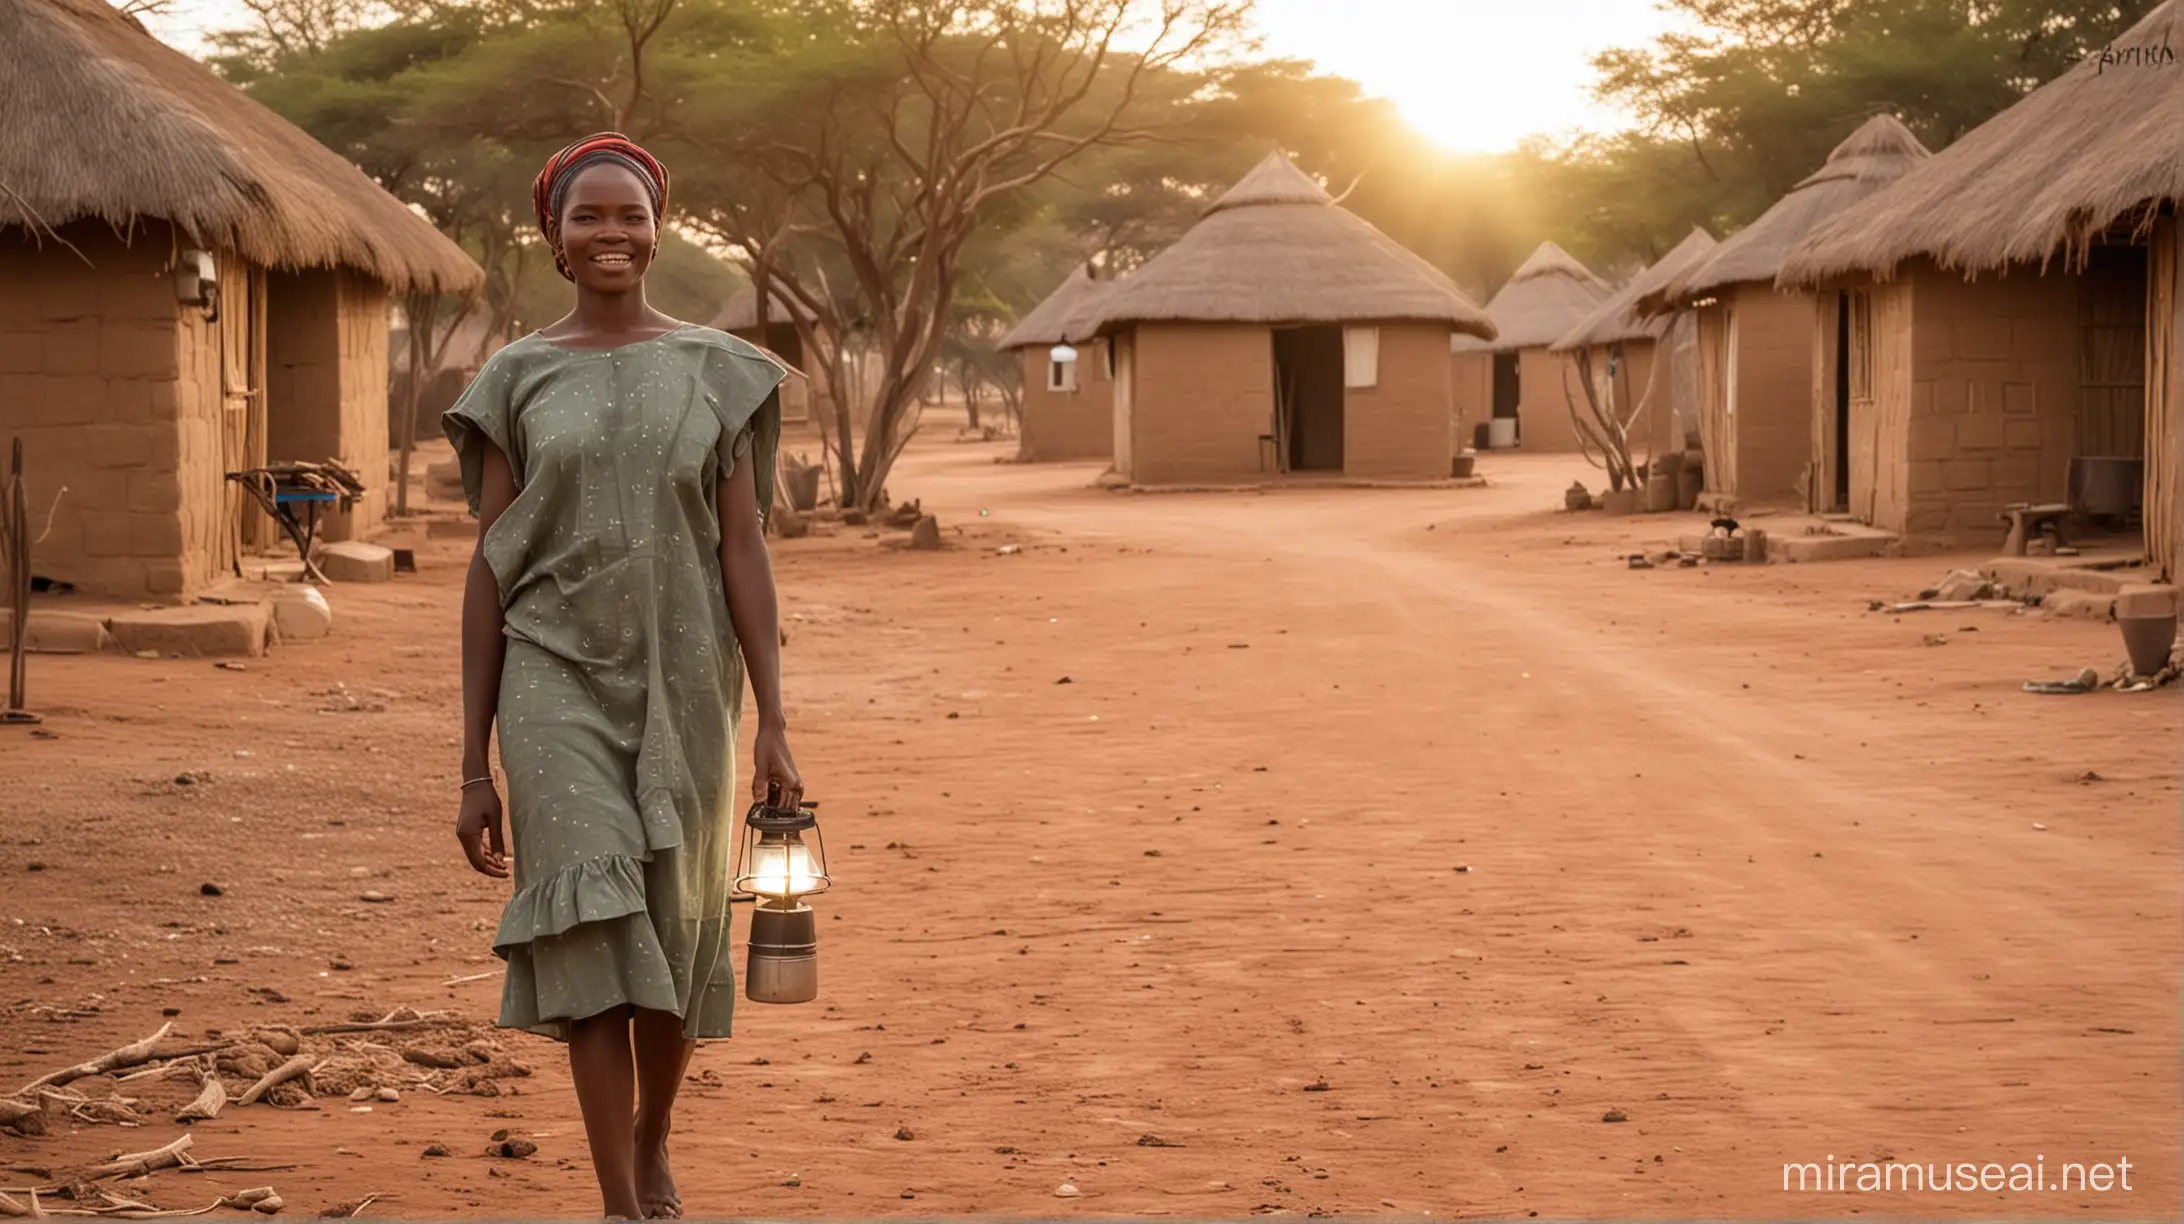 African Woman Carrying Solar Light in Rural Village with Rondavel Mud Huts